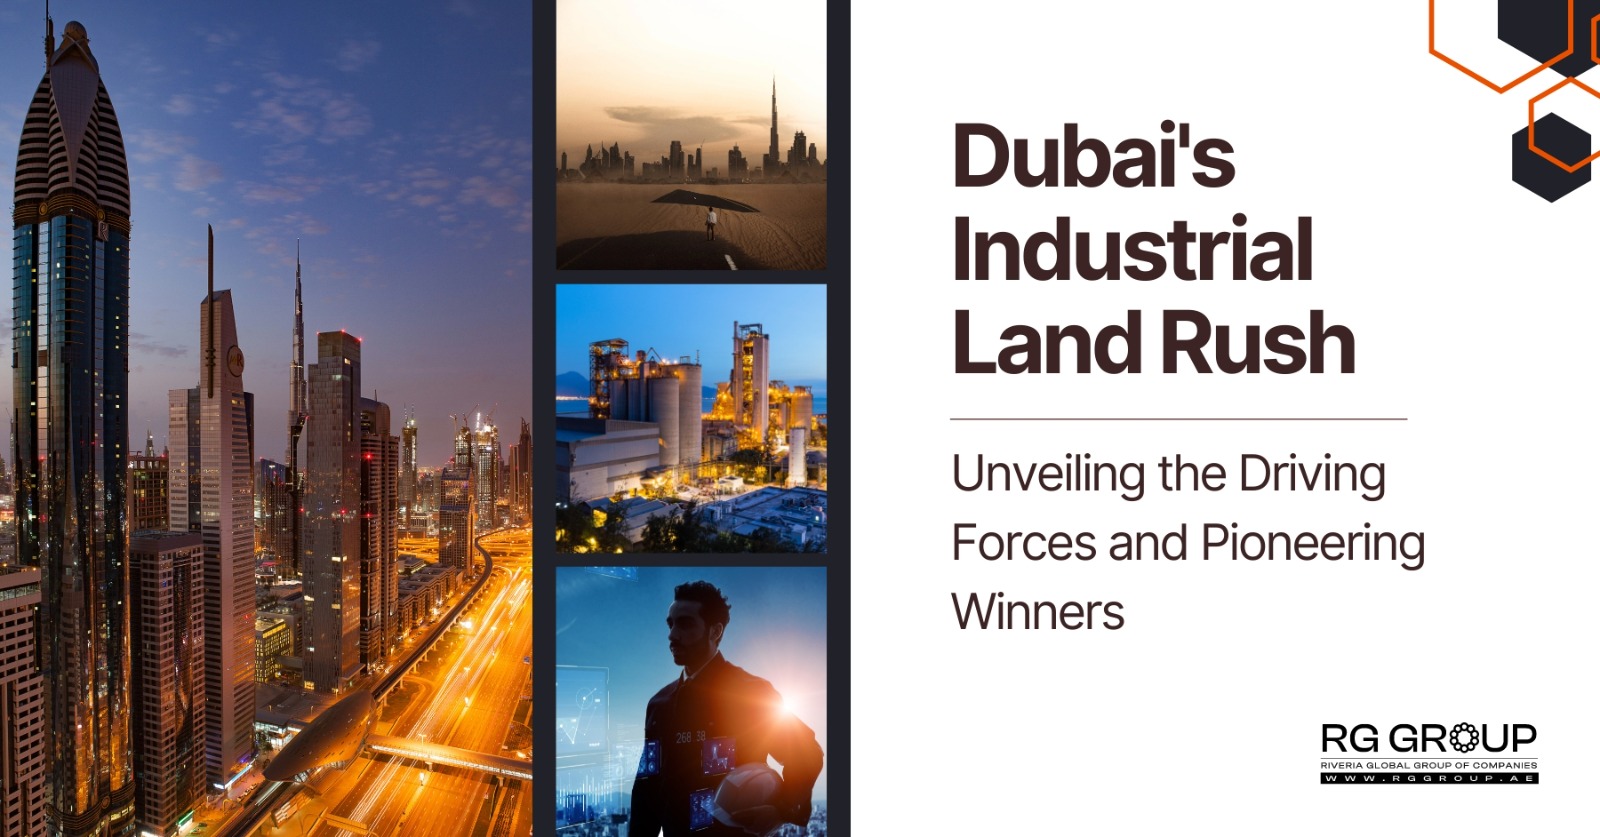 Dubai’s Industrial Land Rush: Unveiling the Driving Forces and Pioneering Winners